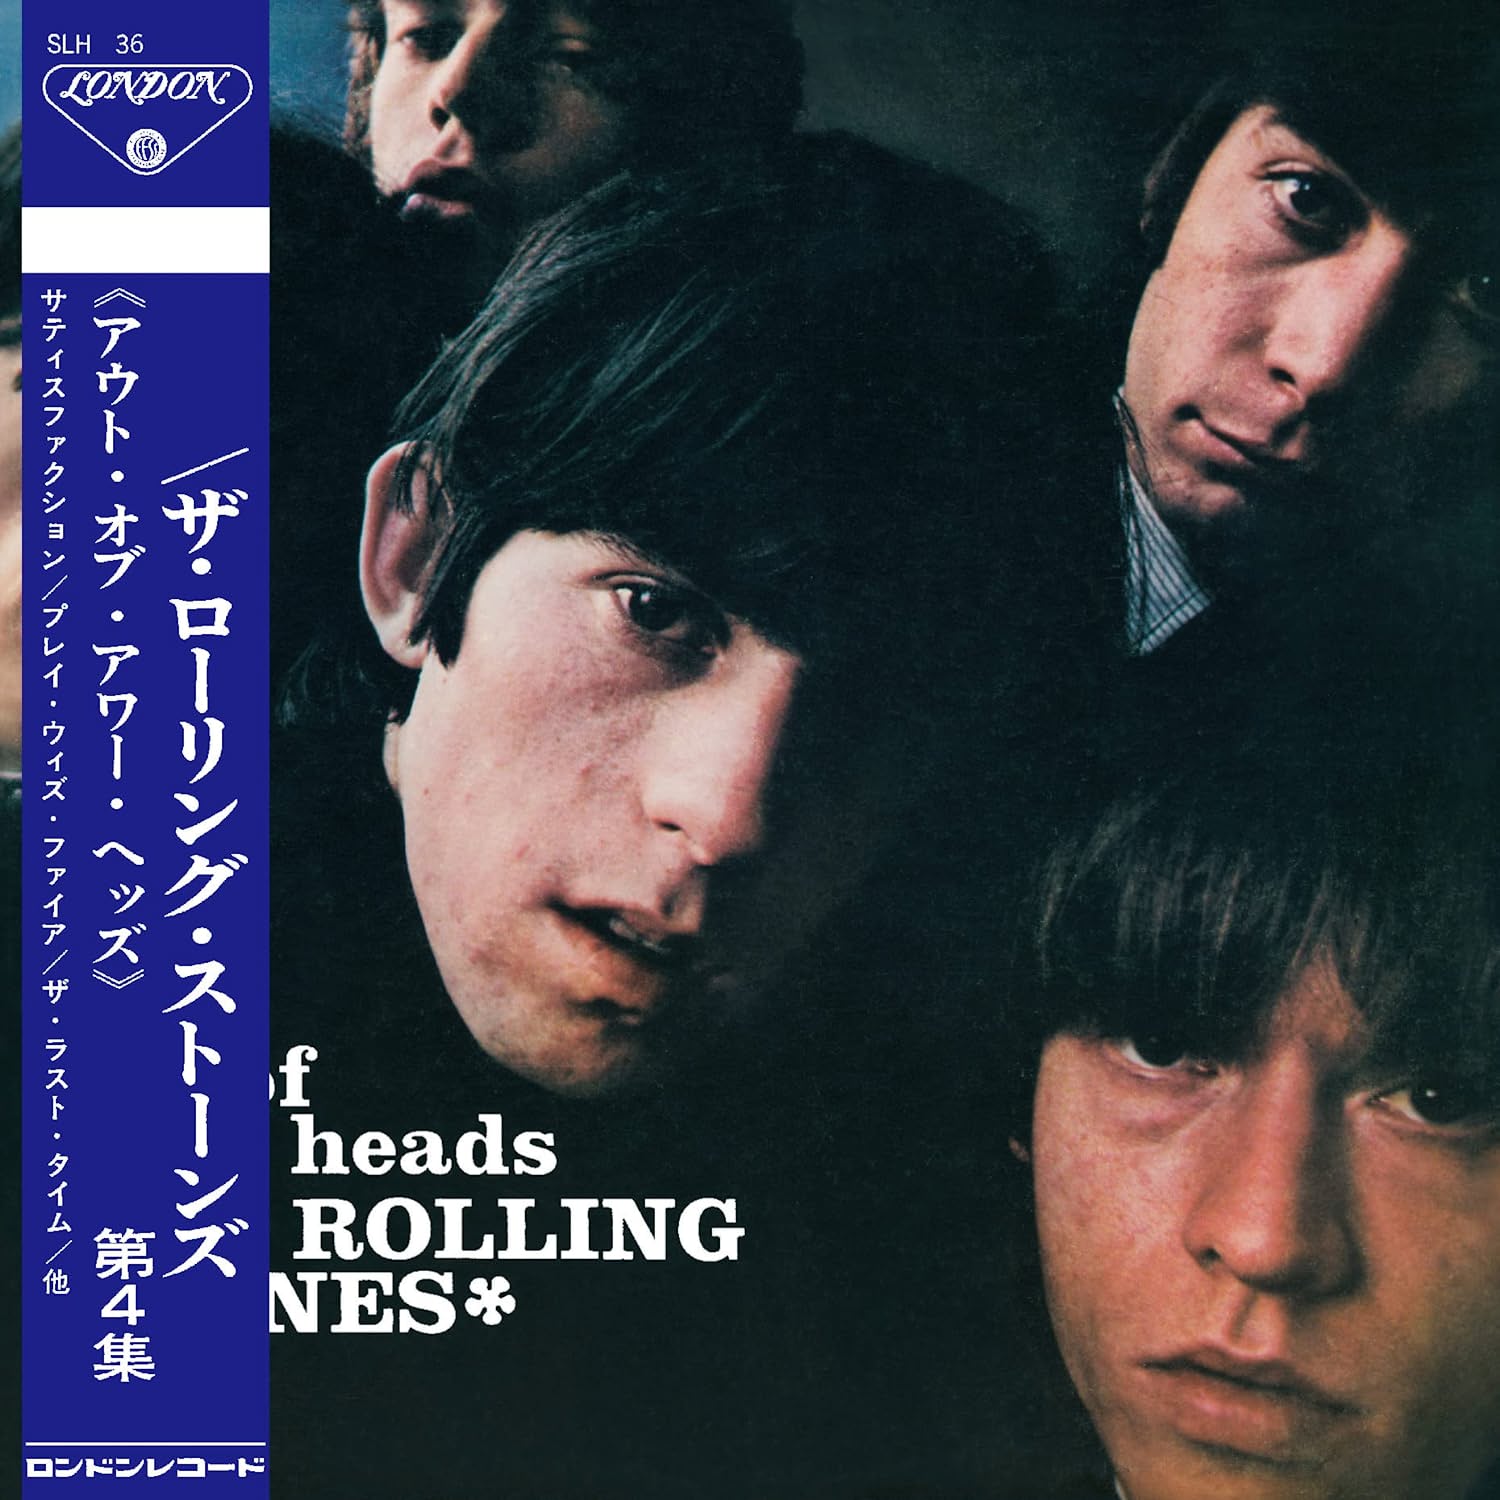 The Rolling Stones Out Of Our Heads USA Version SHM CD [Mono][Importado]